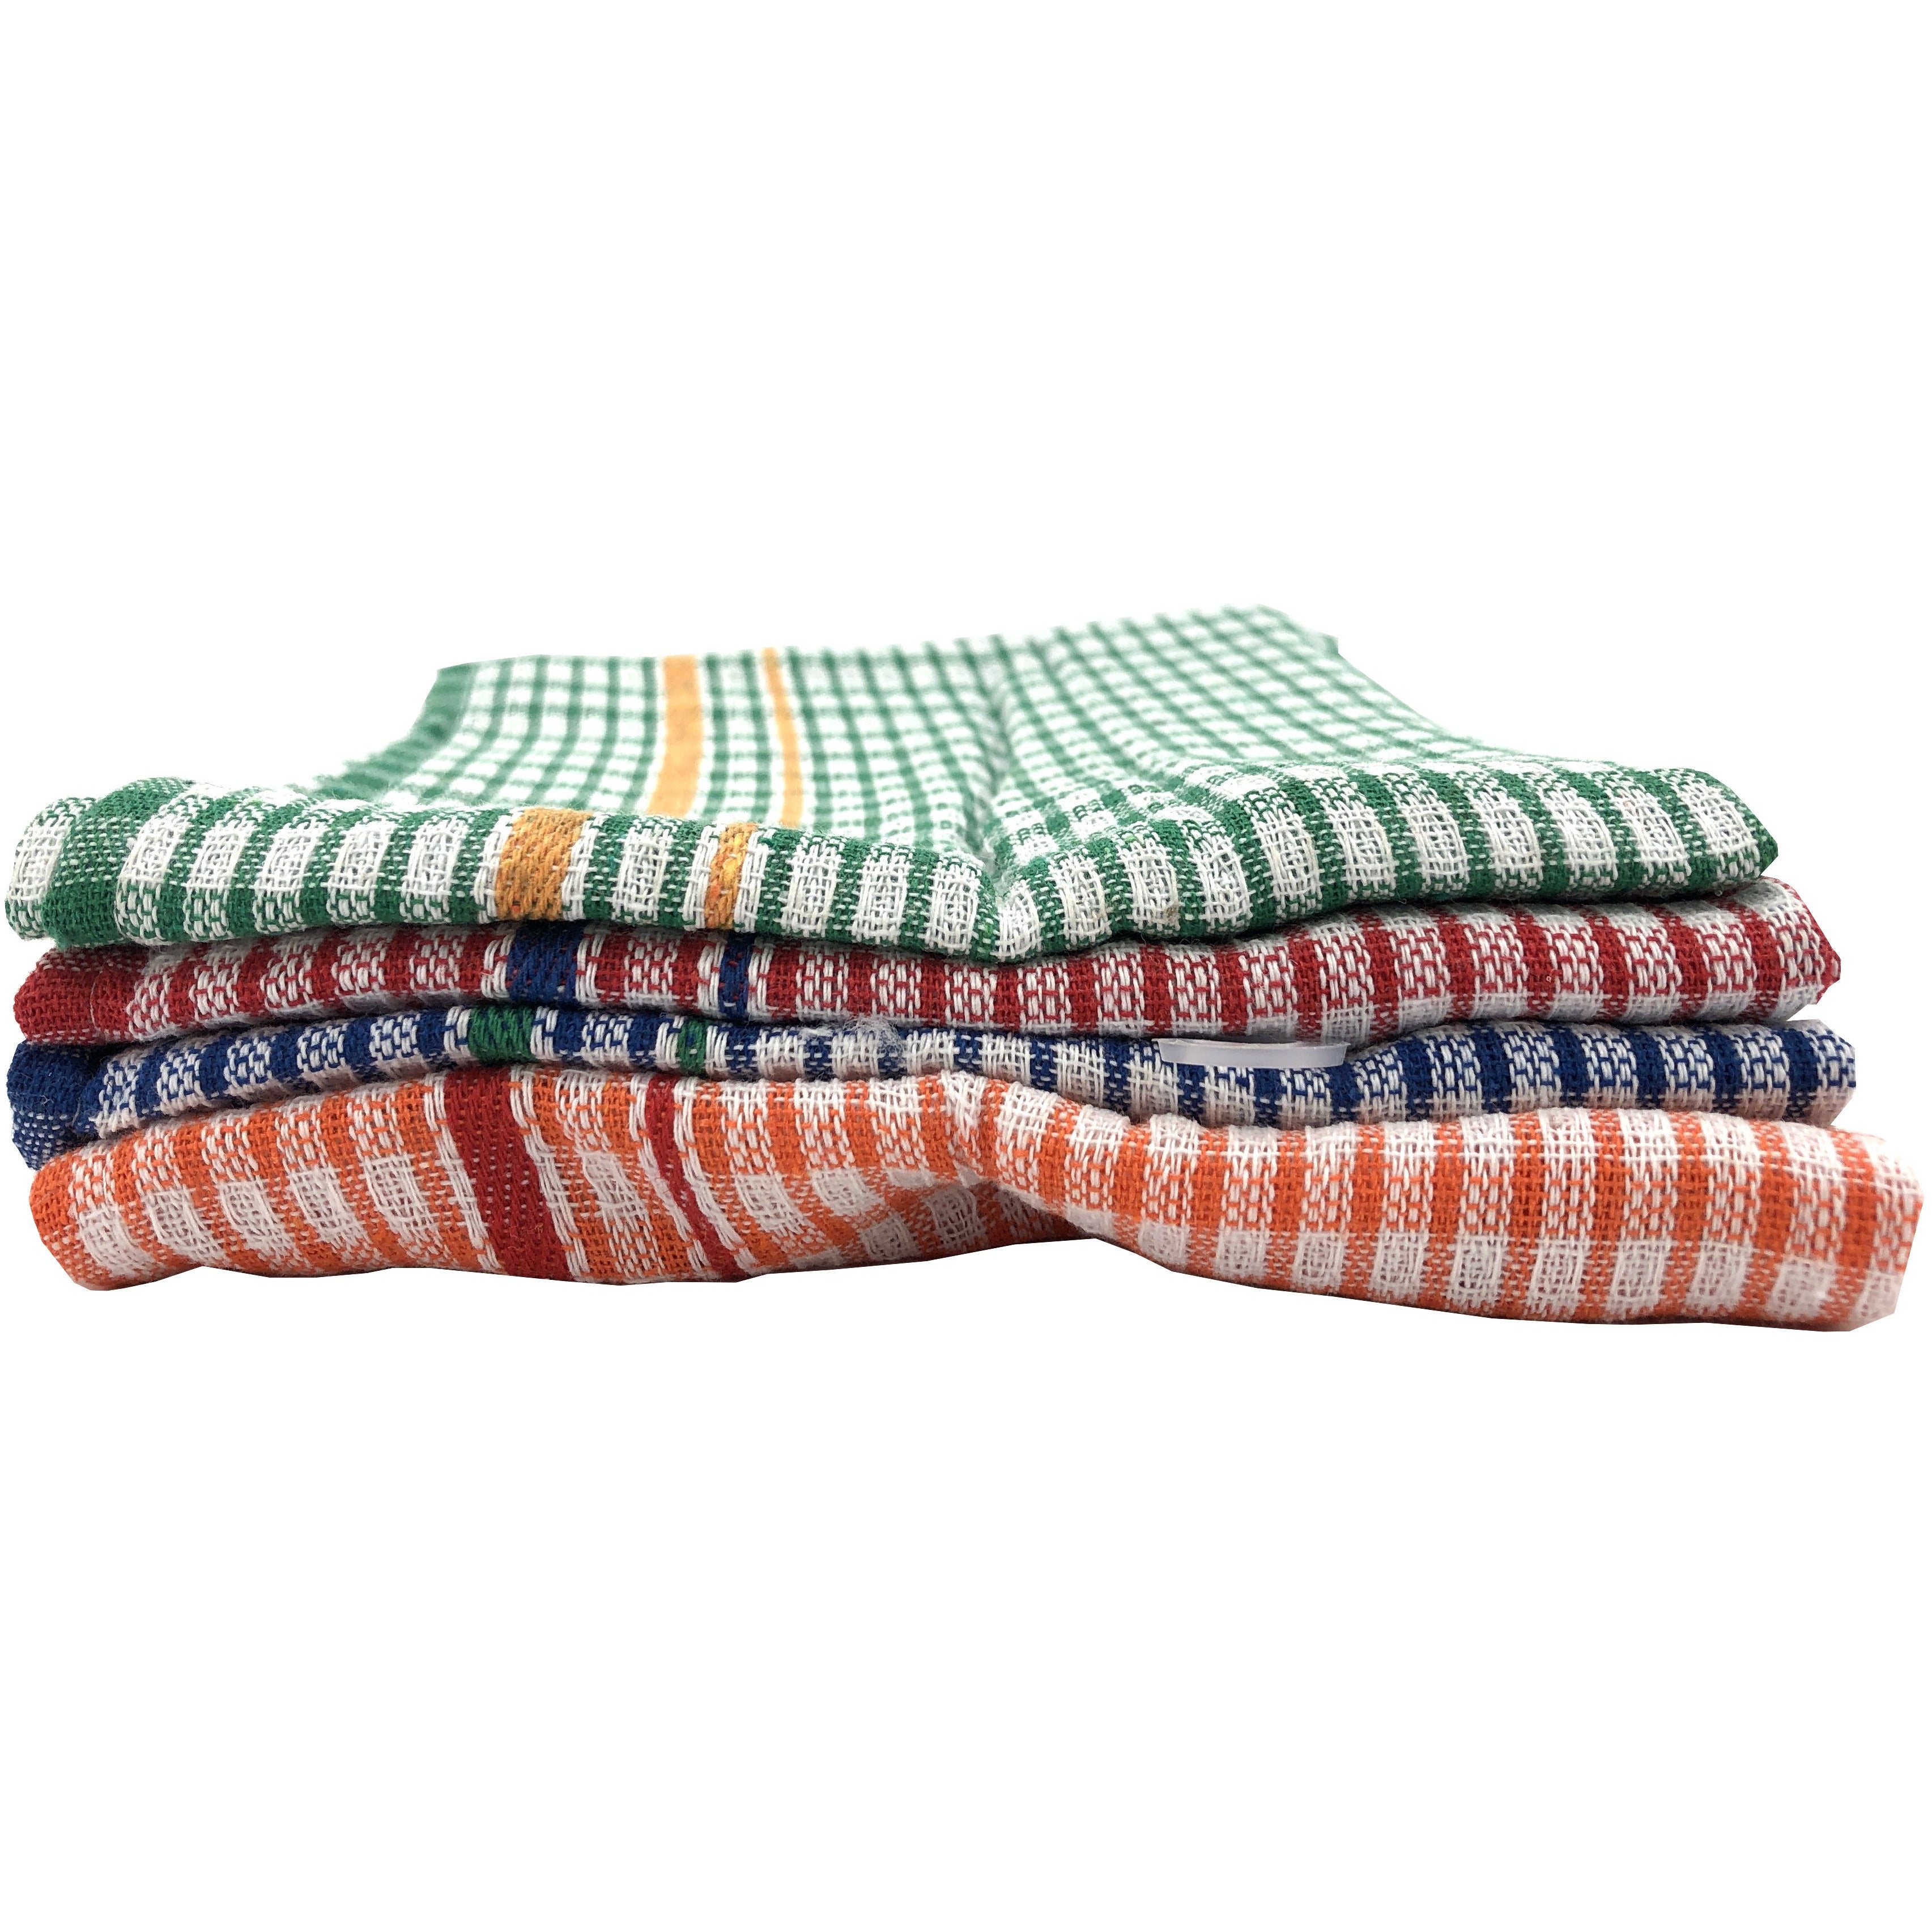 Multi pack Dish cloth bundle with a brighlly multicolored Plaid design for basic kitchen cleaning